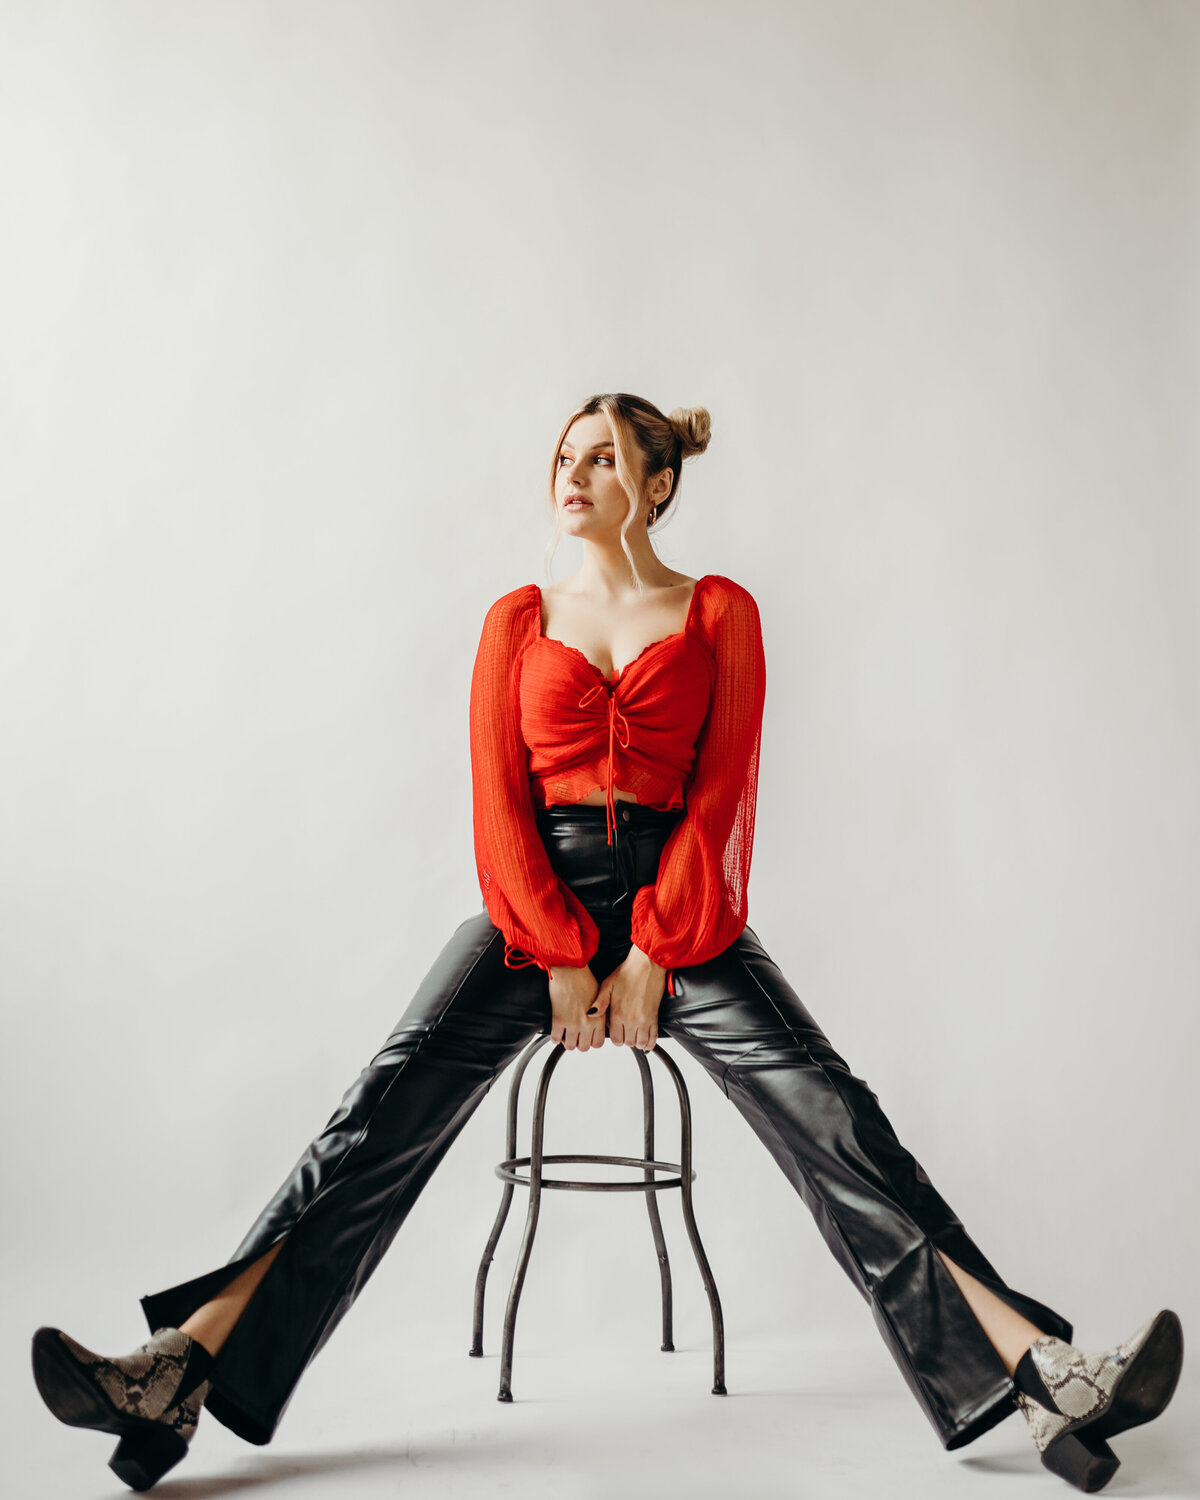 Girl in red shirt and black pants on a stool